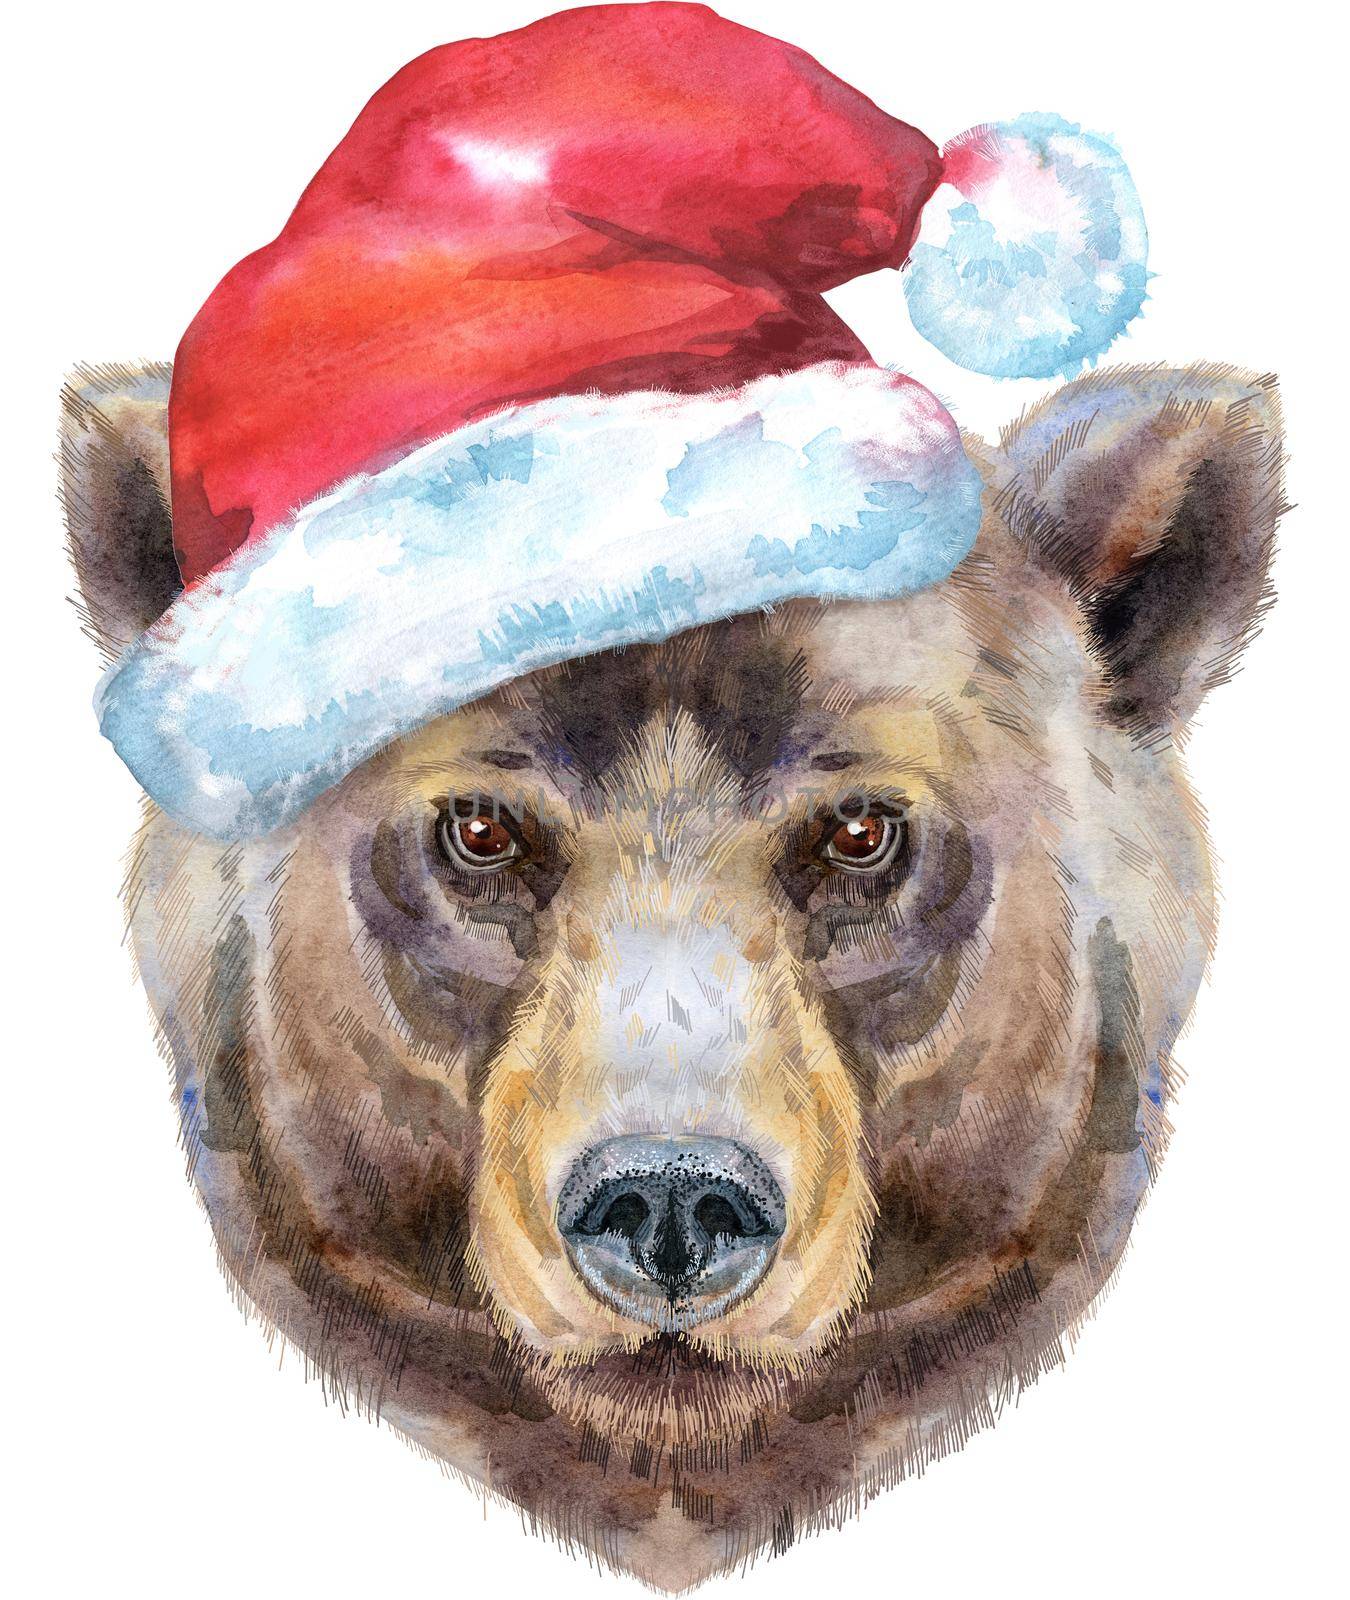 Bear head in Santa hat. Watercolor bear painting illustration isolated on white background by NataOmsk